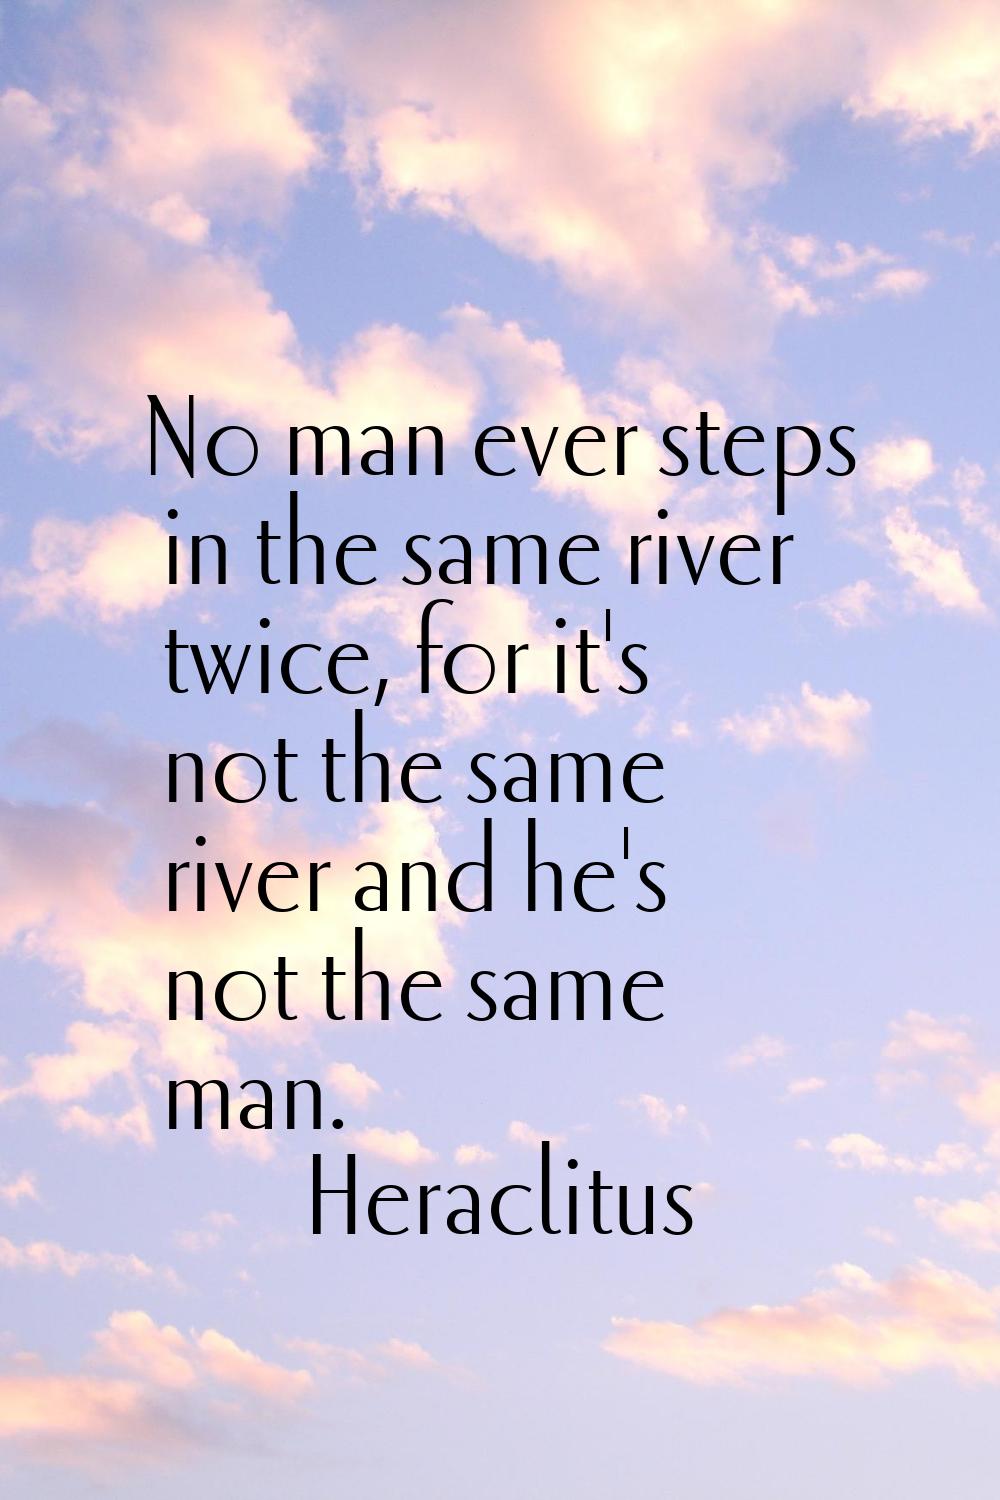 No man ever steps in the same river twice, for it's not the same river and he's not the same man.